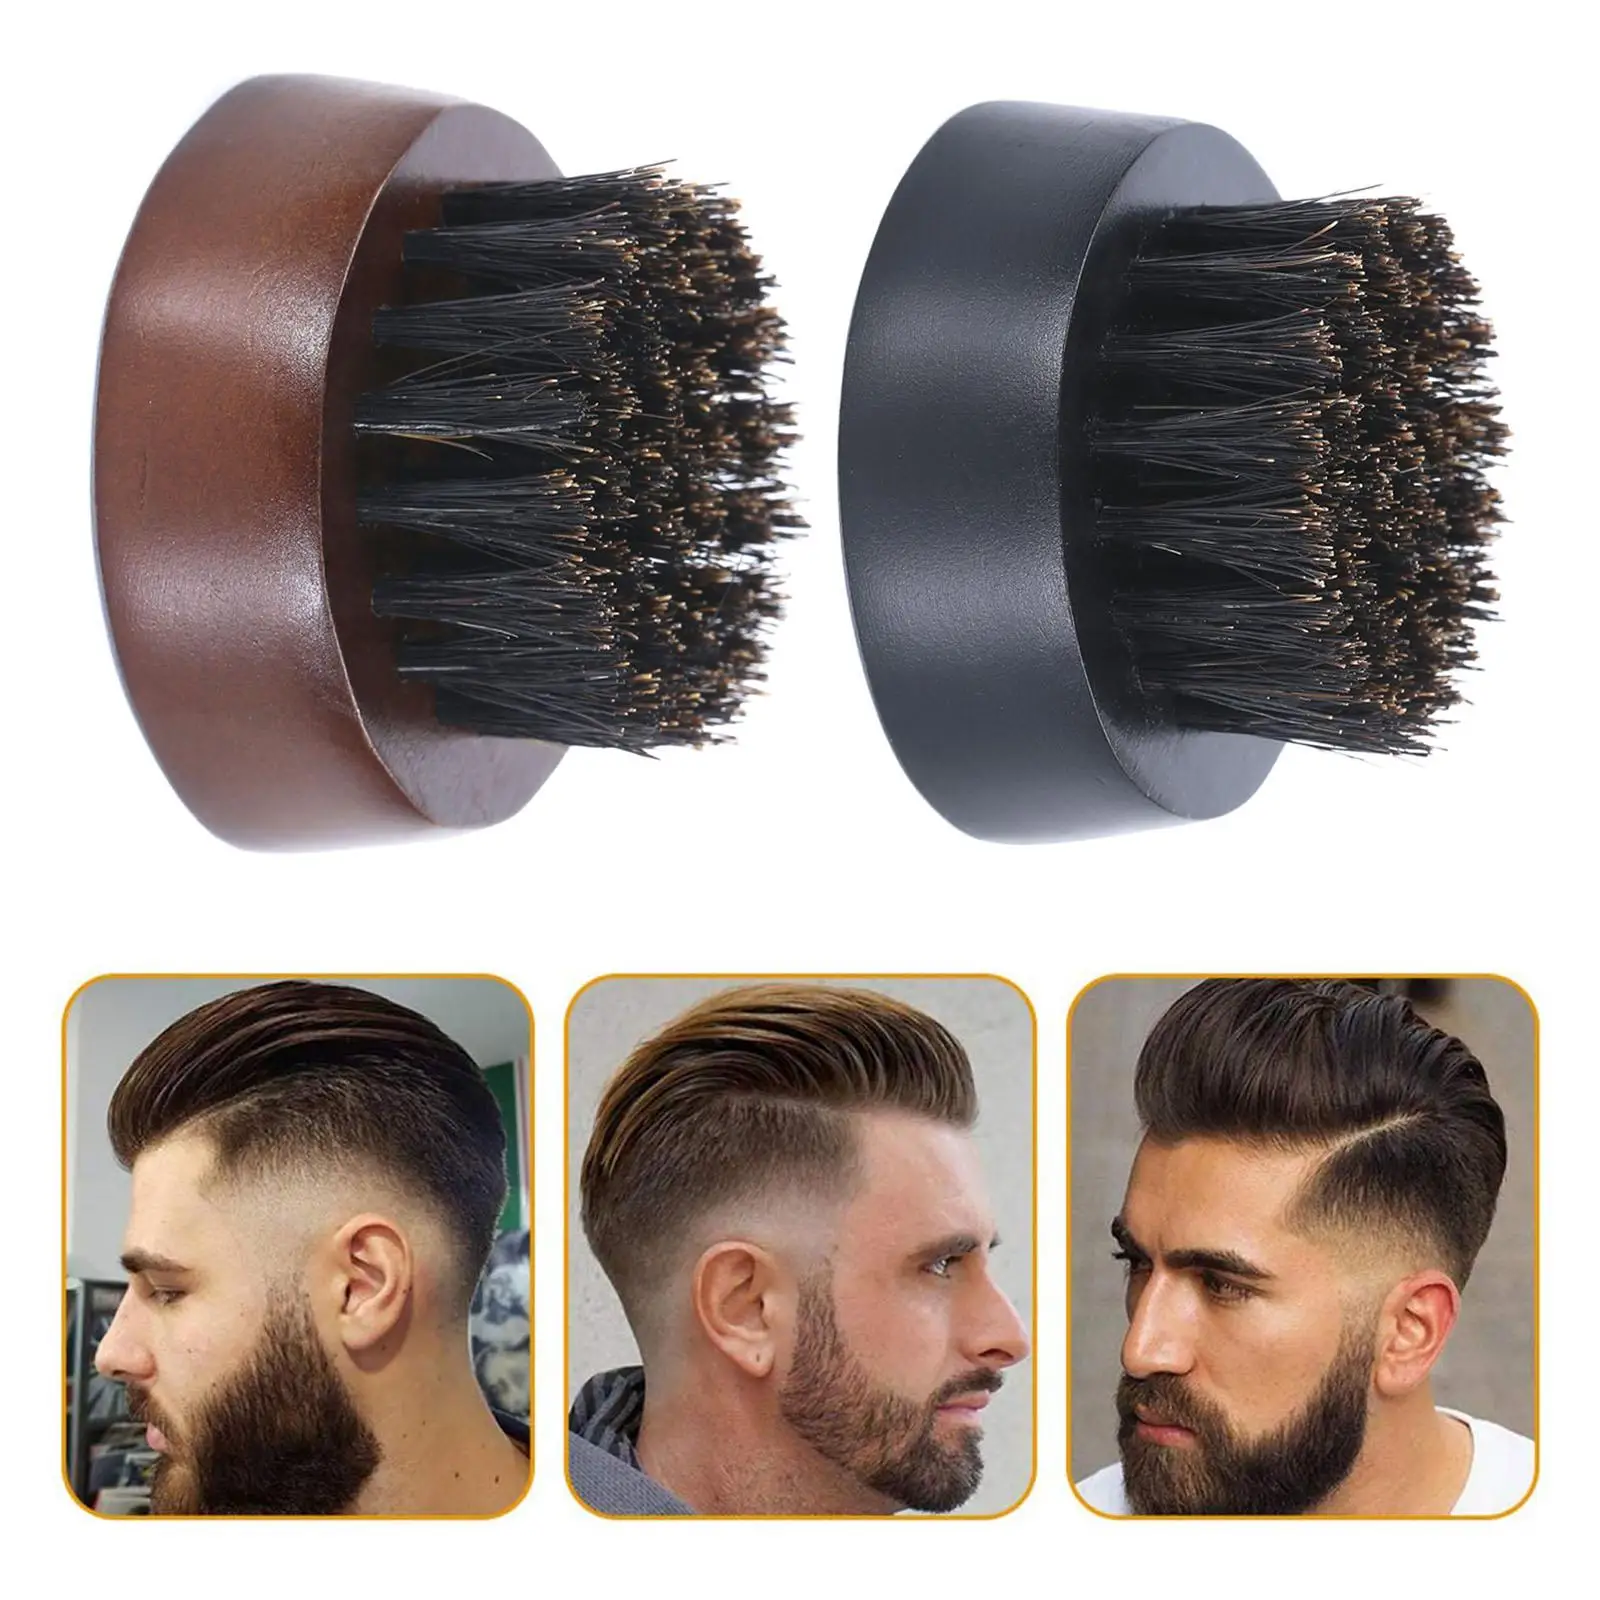 Wooden Beard Brush Boars Tame Hair Styling Tools for Conditioning